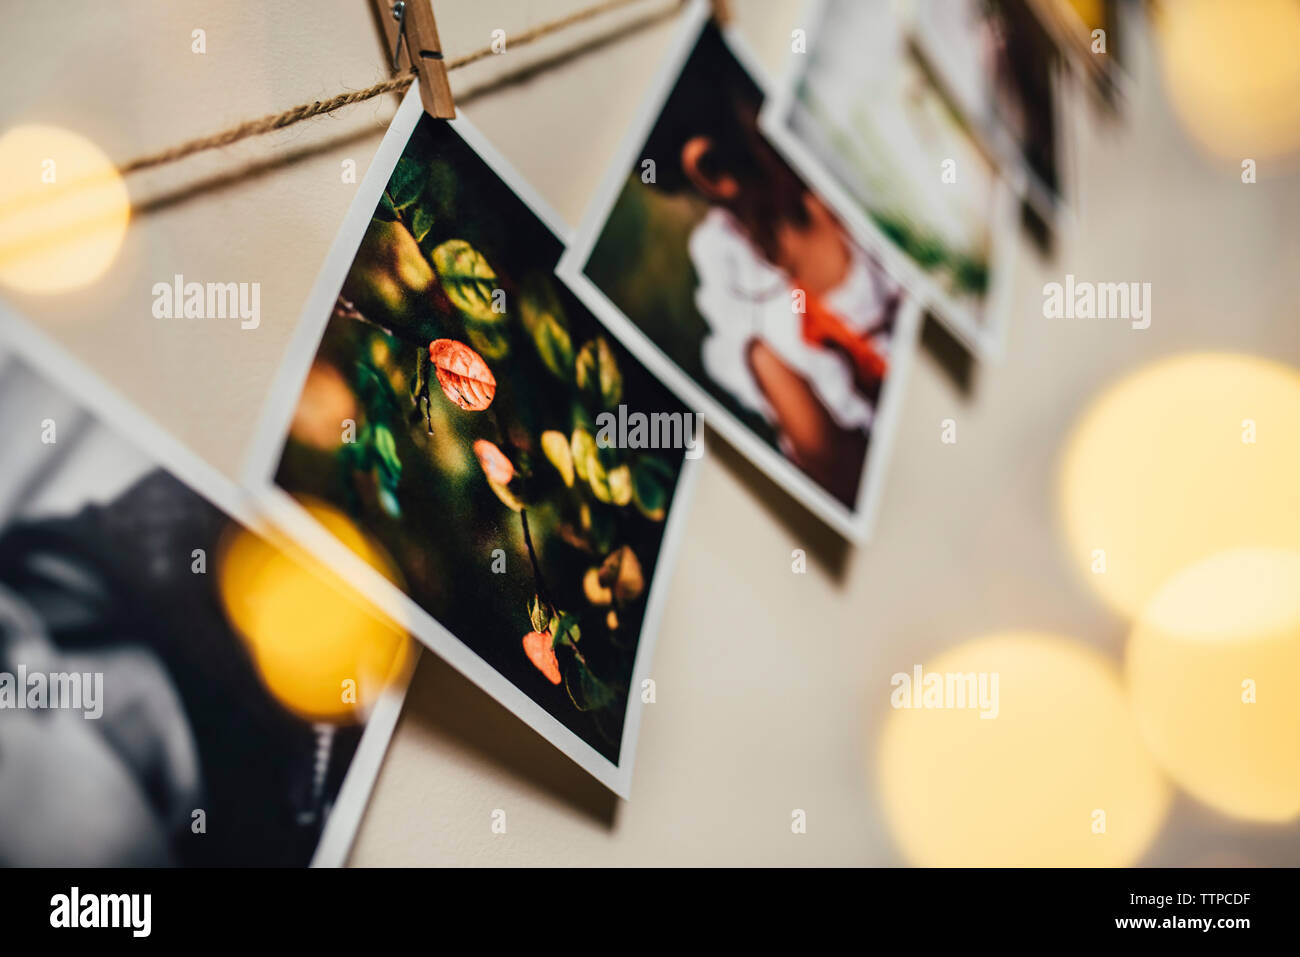 Low angle view of photographs hanging on rope against wall Stock Photo